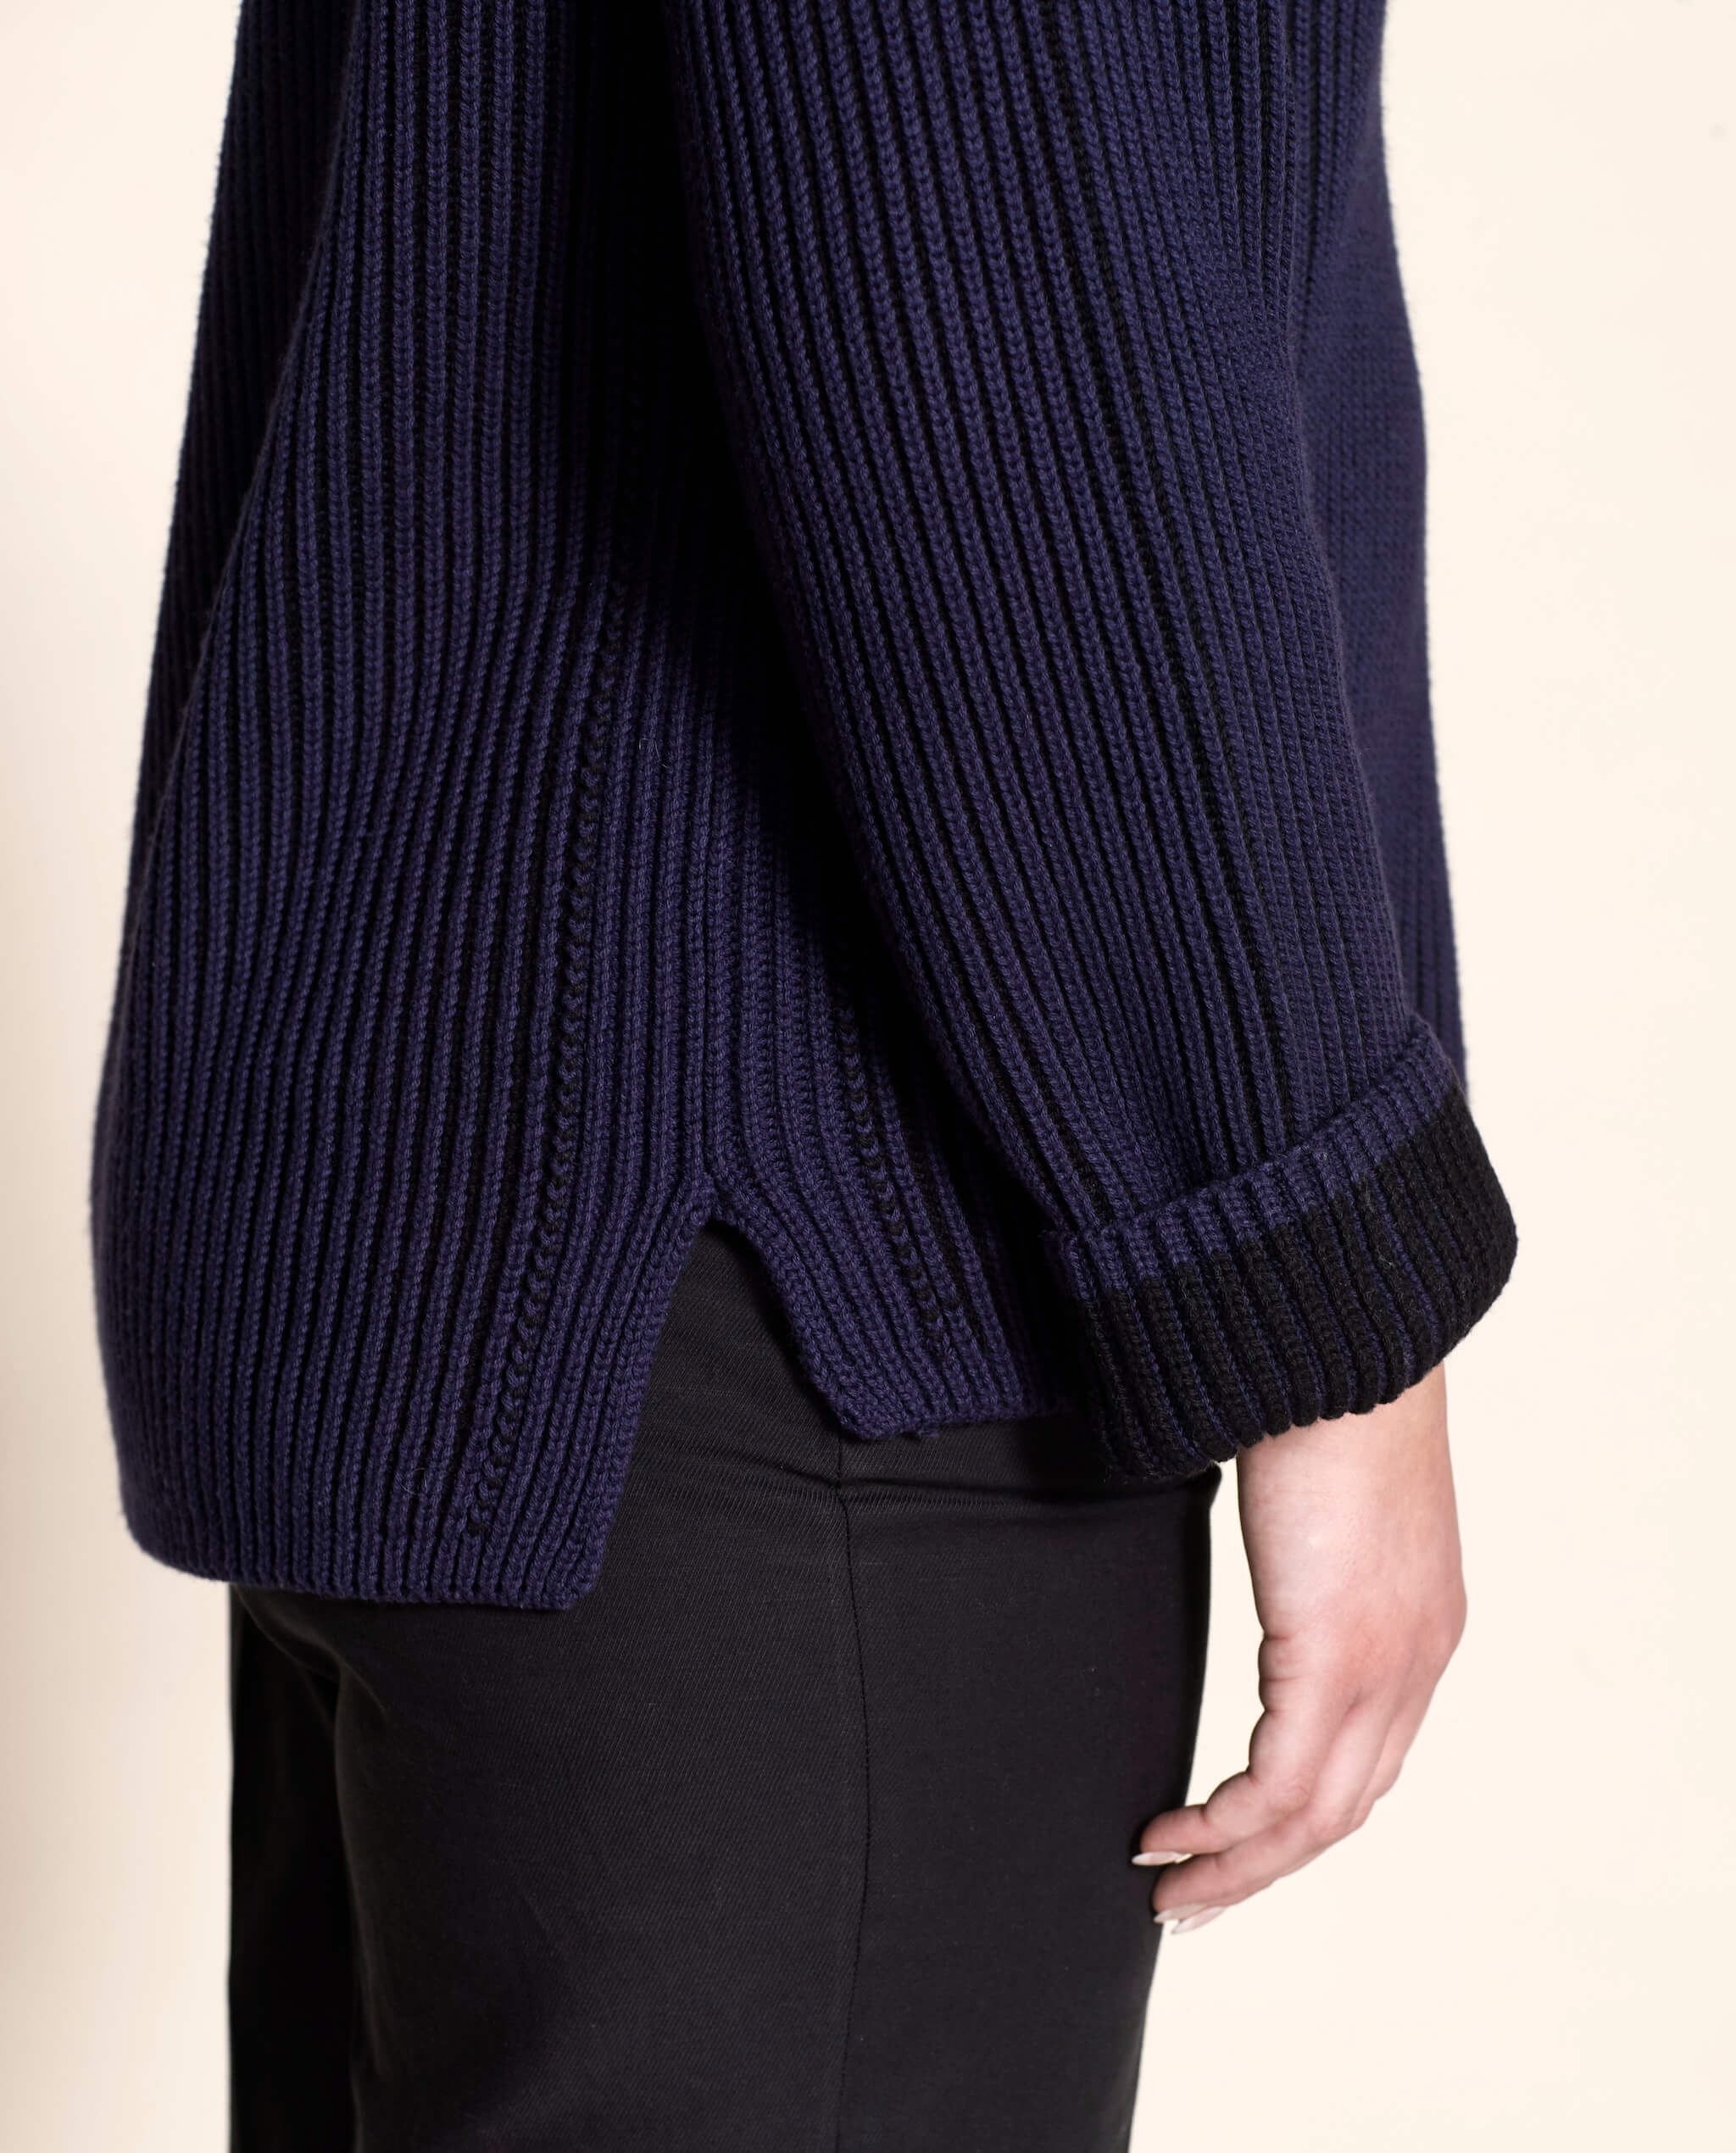 Detail of the side view of Cyme Copenhagen's navy ribbed sweater, featuring a high-low hem and textured knit, aligning with Scandinavian fashion trends and the brand's dedication to sustainable materials in women's clothing.